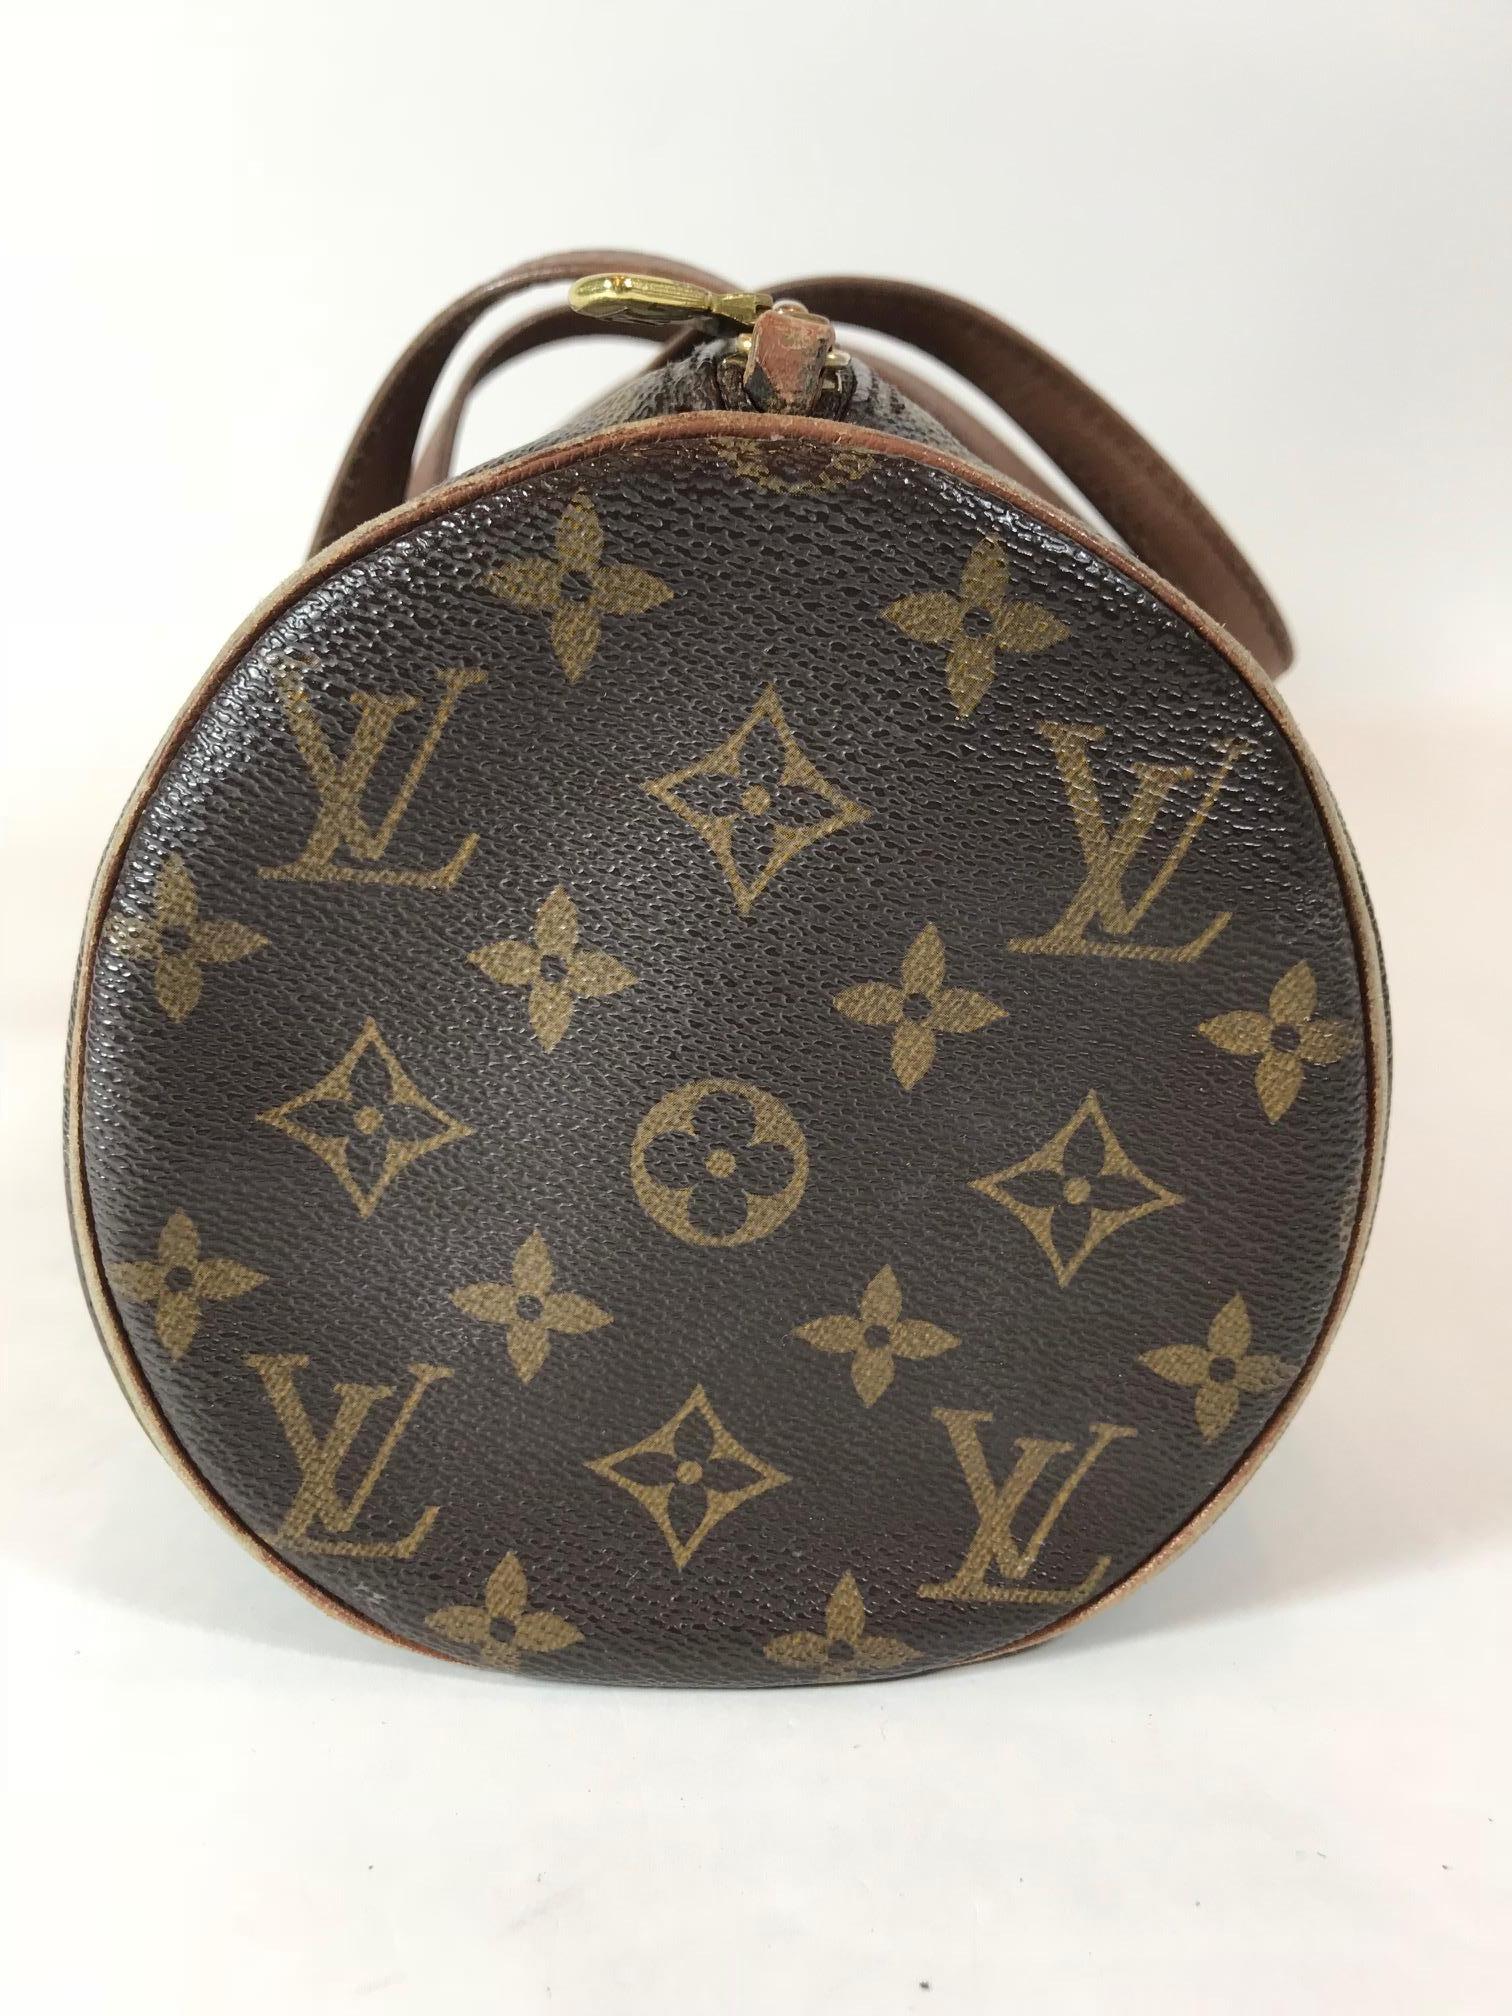 We adore this vintage Louis Vuitton Papillion 30 Monogram Handbag with an adorable inside pouch. This is the biggest bag available in the Papillon line. It is made of the traditional monogram canvas with a vachetta leather trim and straps. It has a